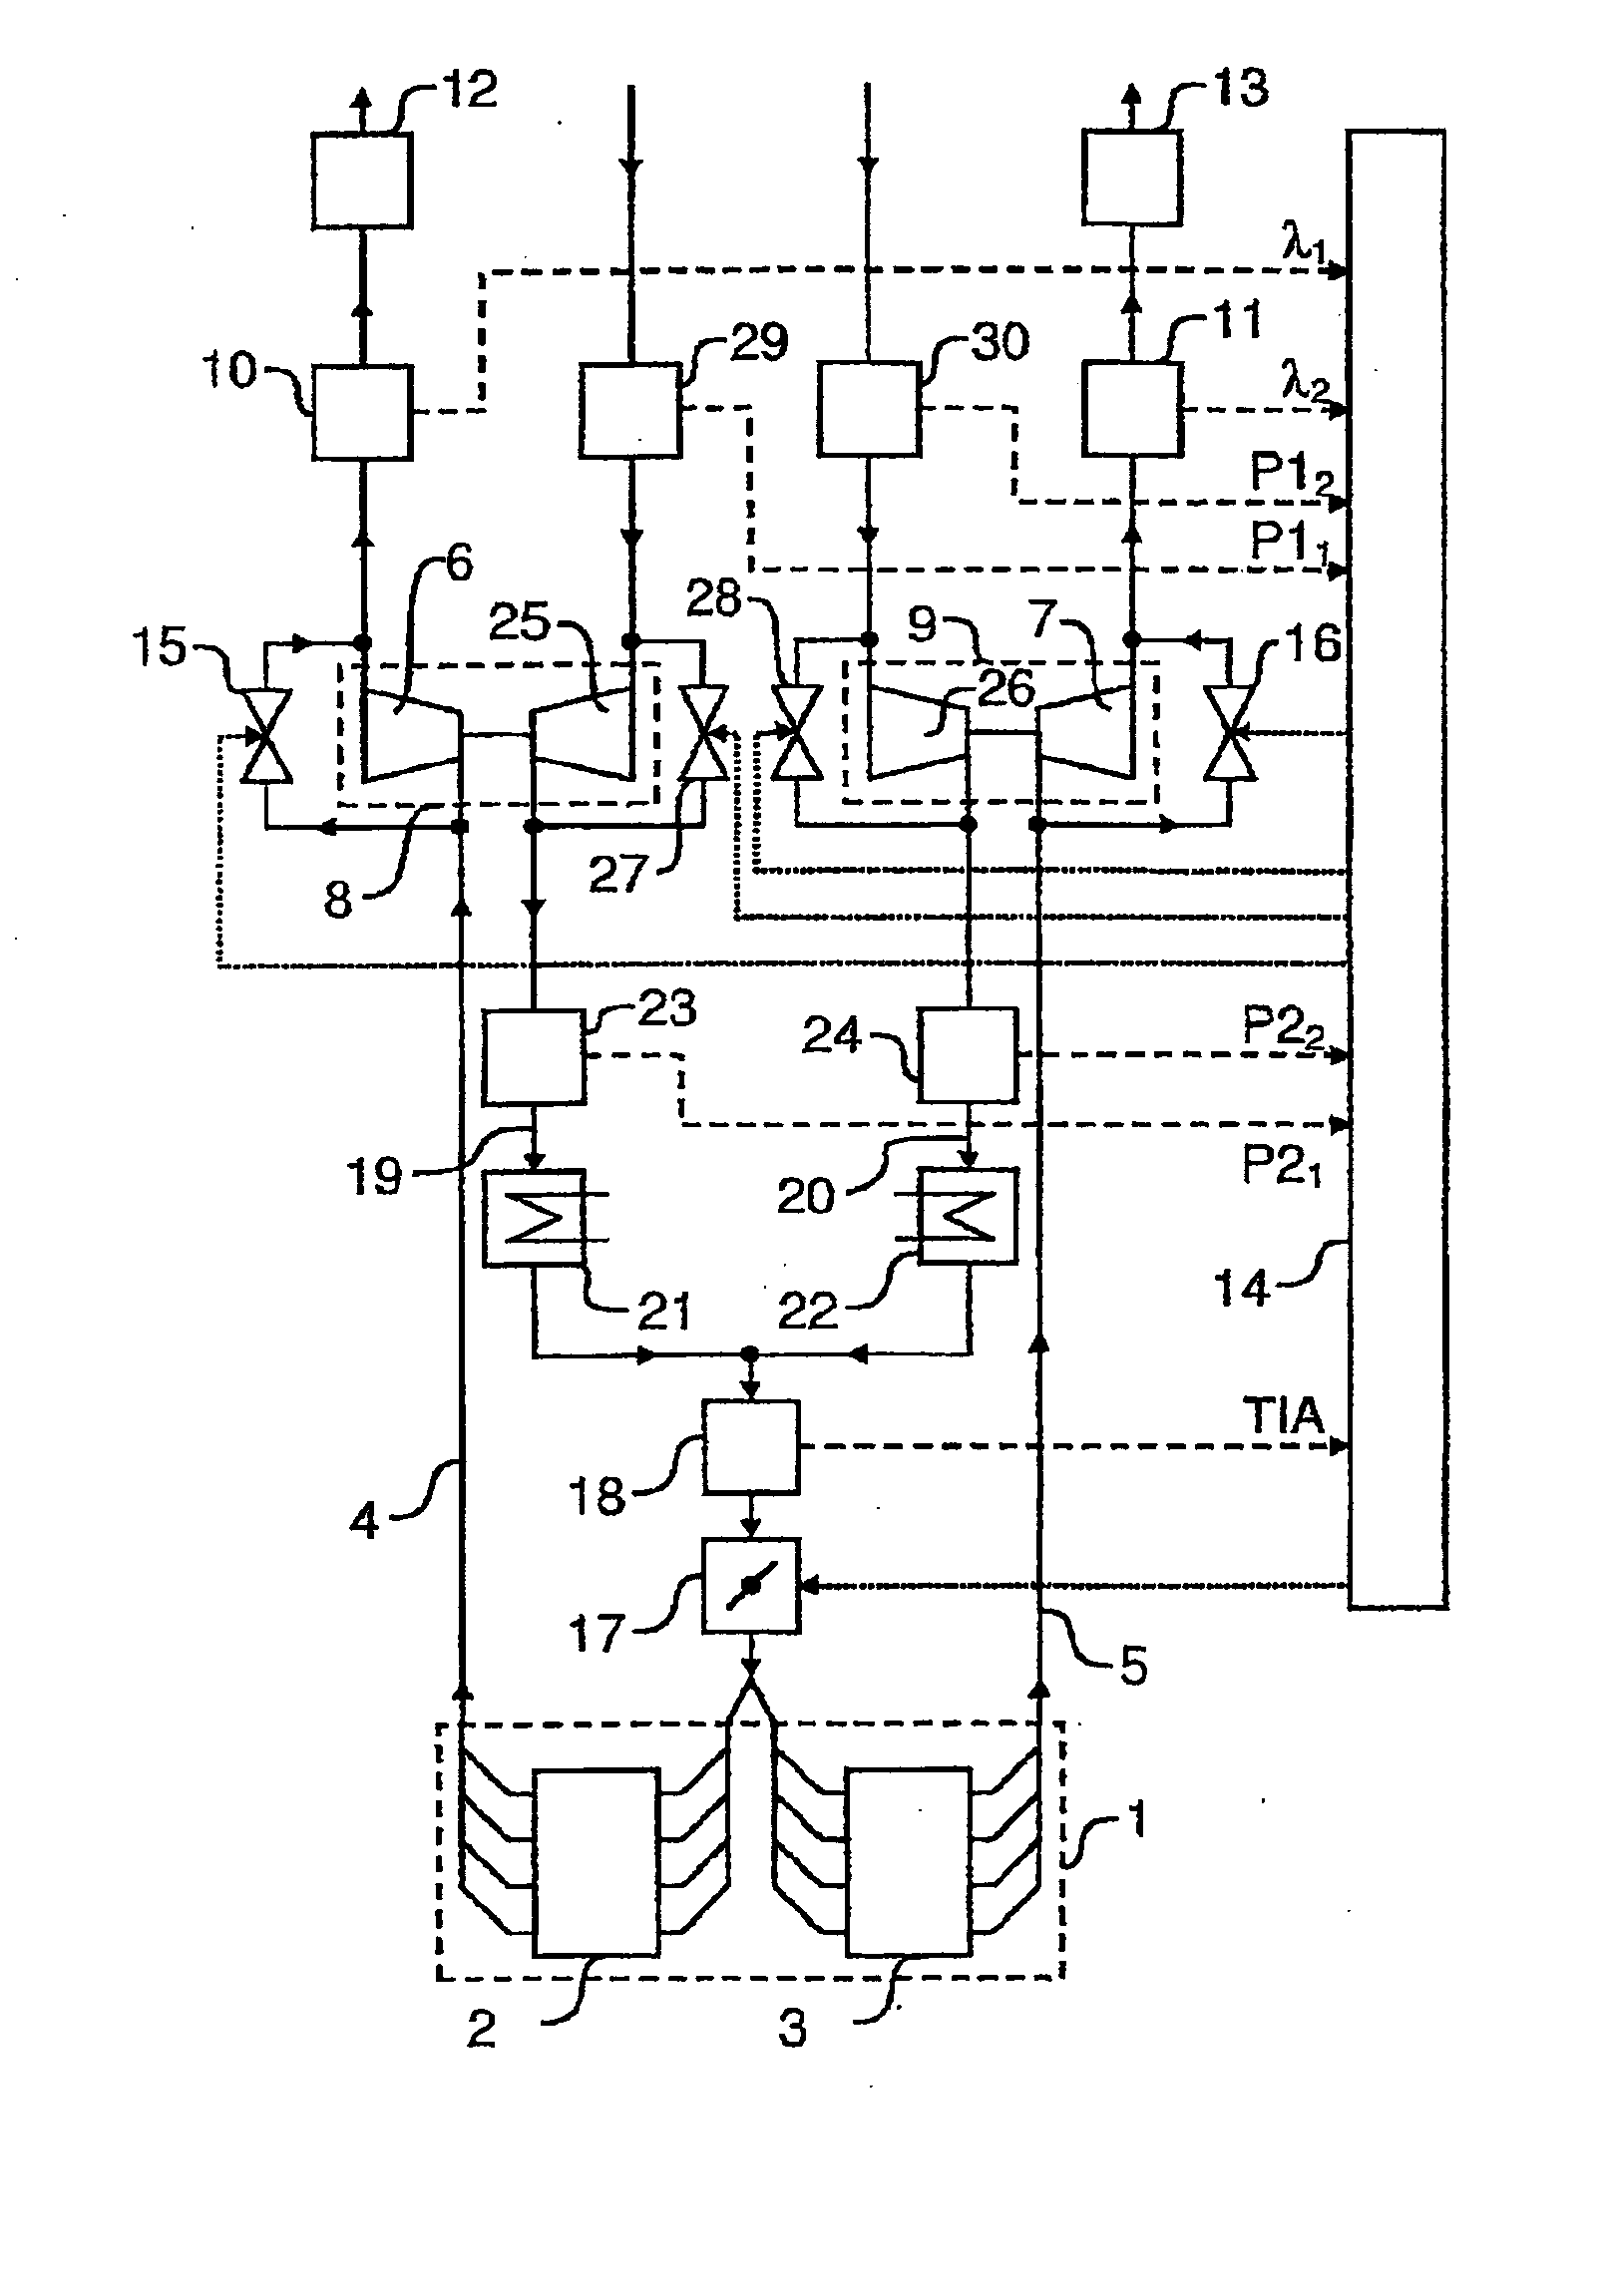 Method for monitoring the speed of a bi-turbocharger